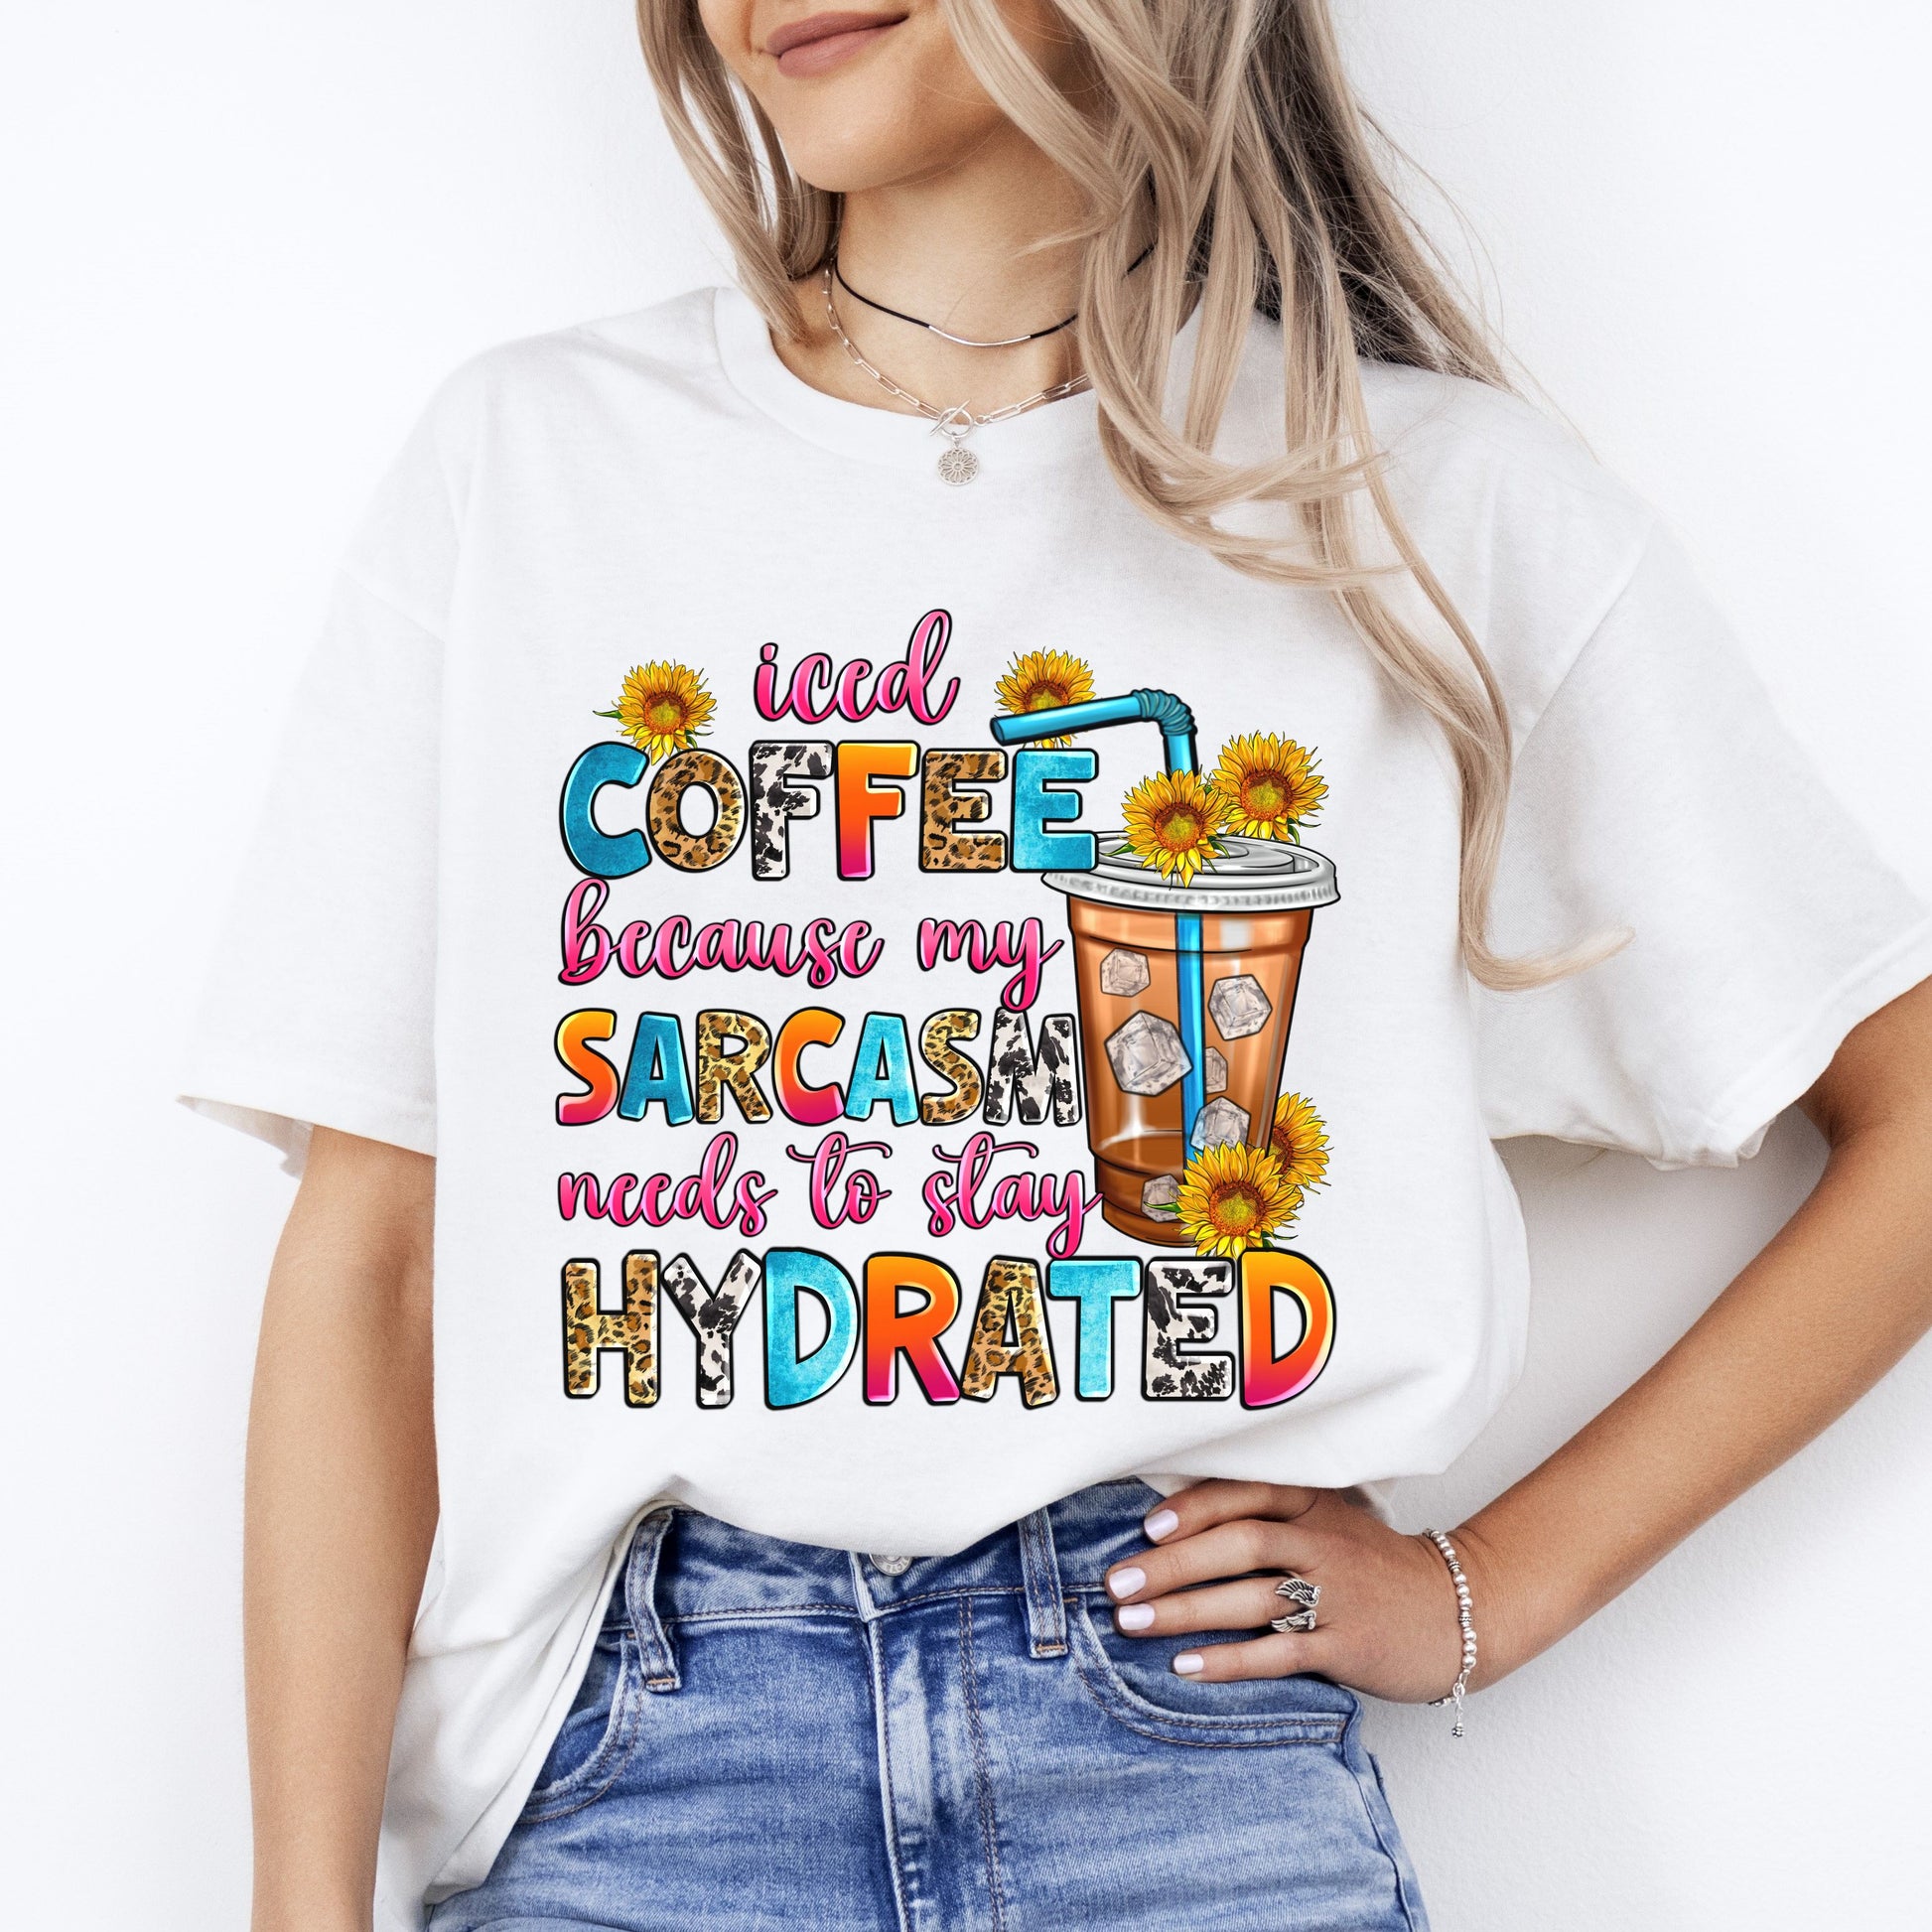 Iced coffee because my sarcasm needs to stay hydrated T-Shirt sarcastic Unisex Tee Sand White Sport Grey-White-Family-Gift-Planet